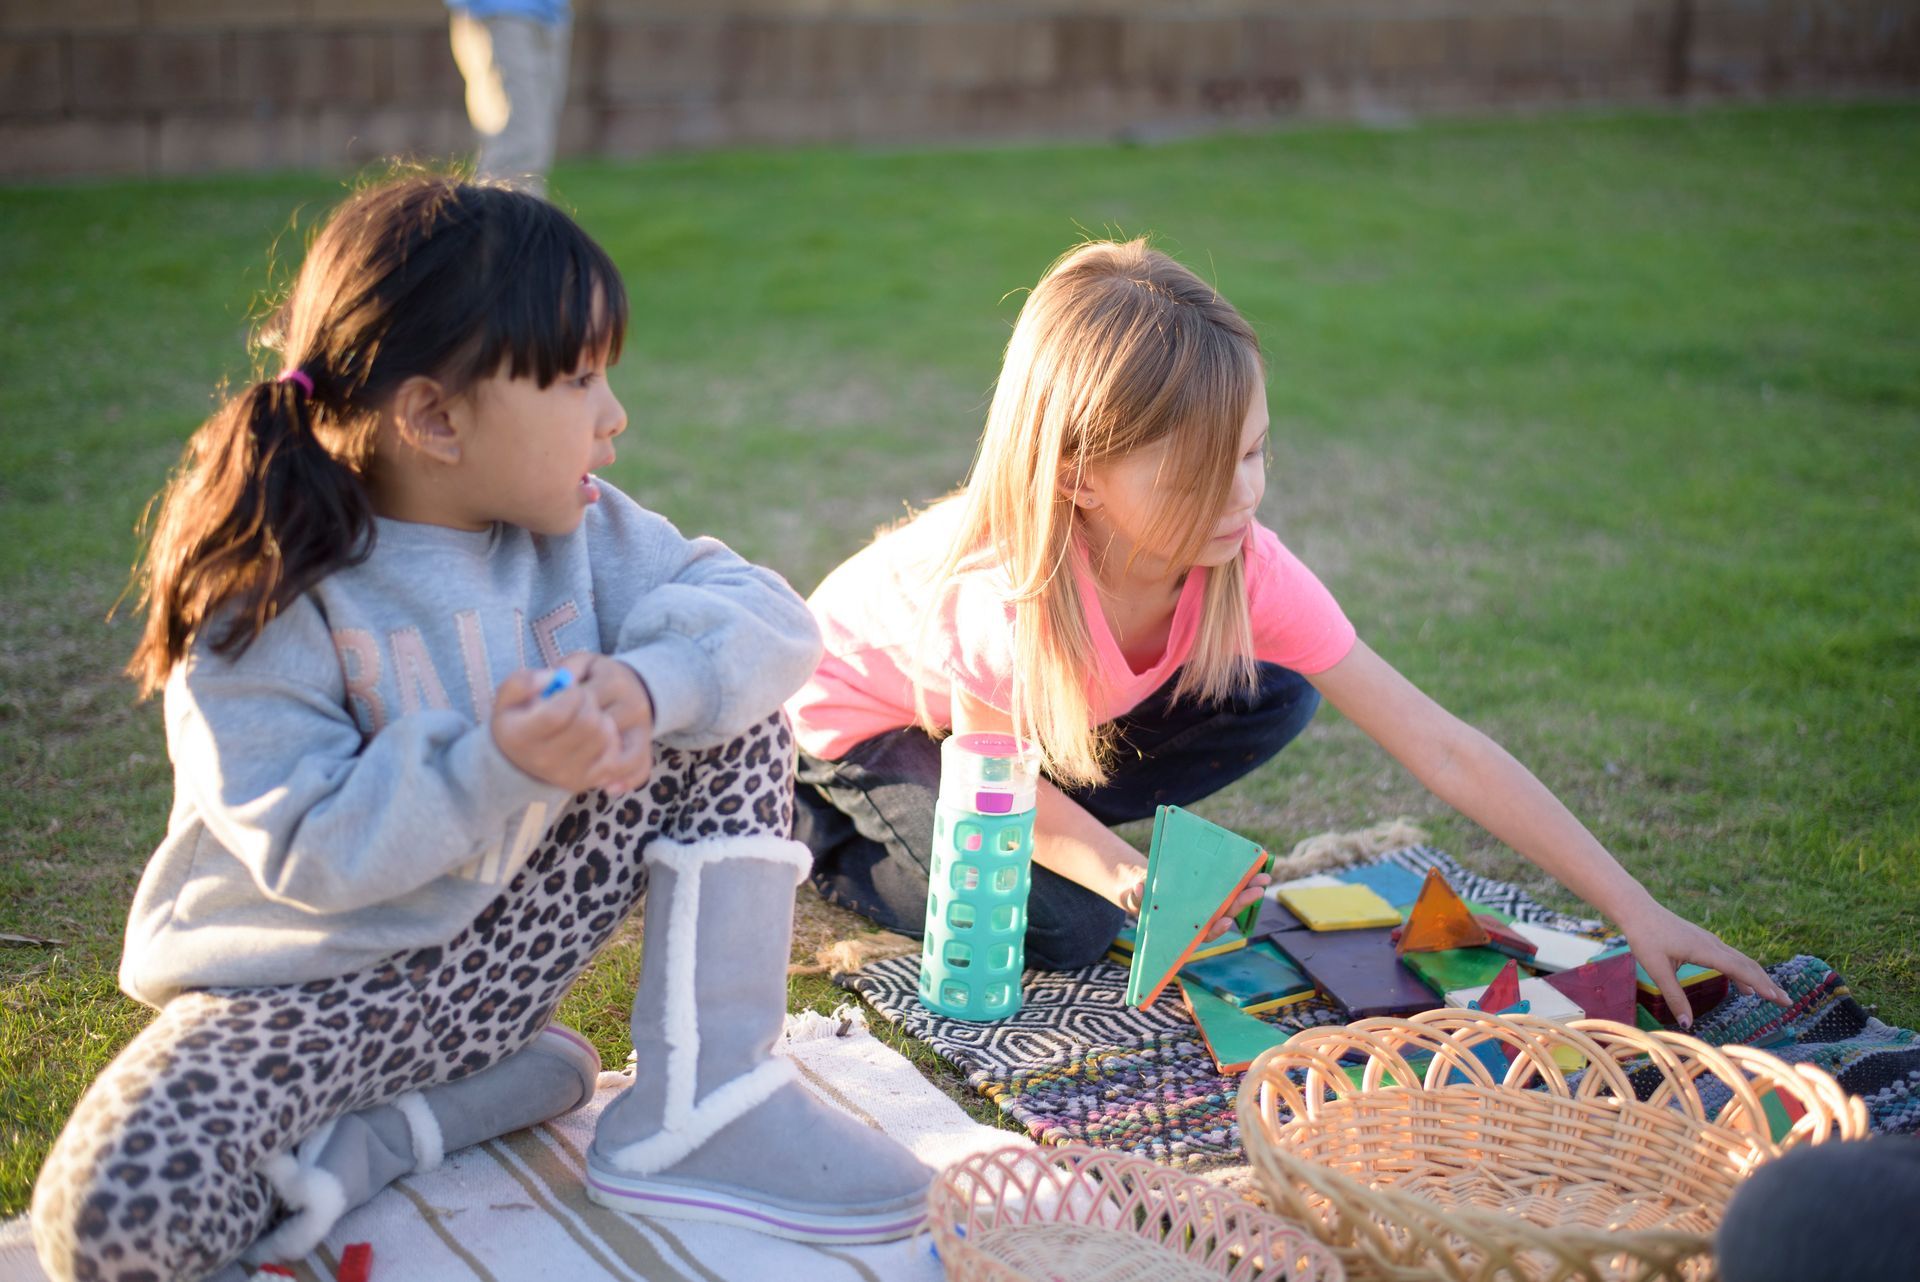 Two montessori children are sitting on a blanket in the grass working with materials.